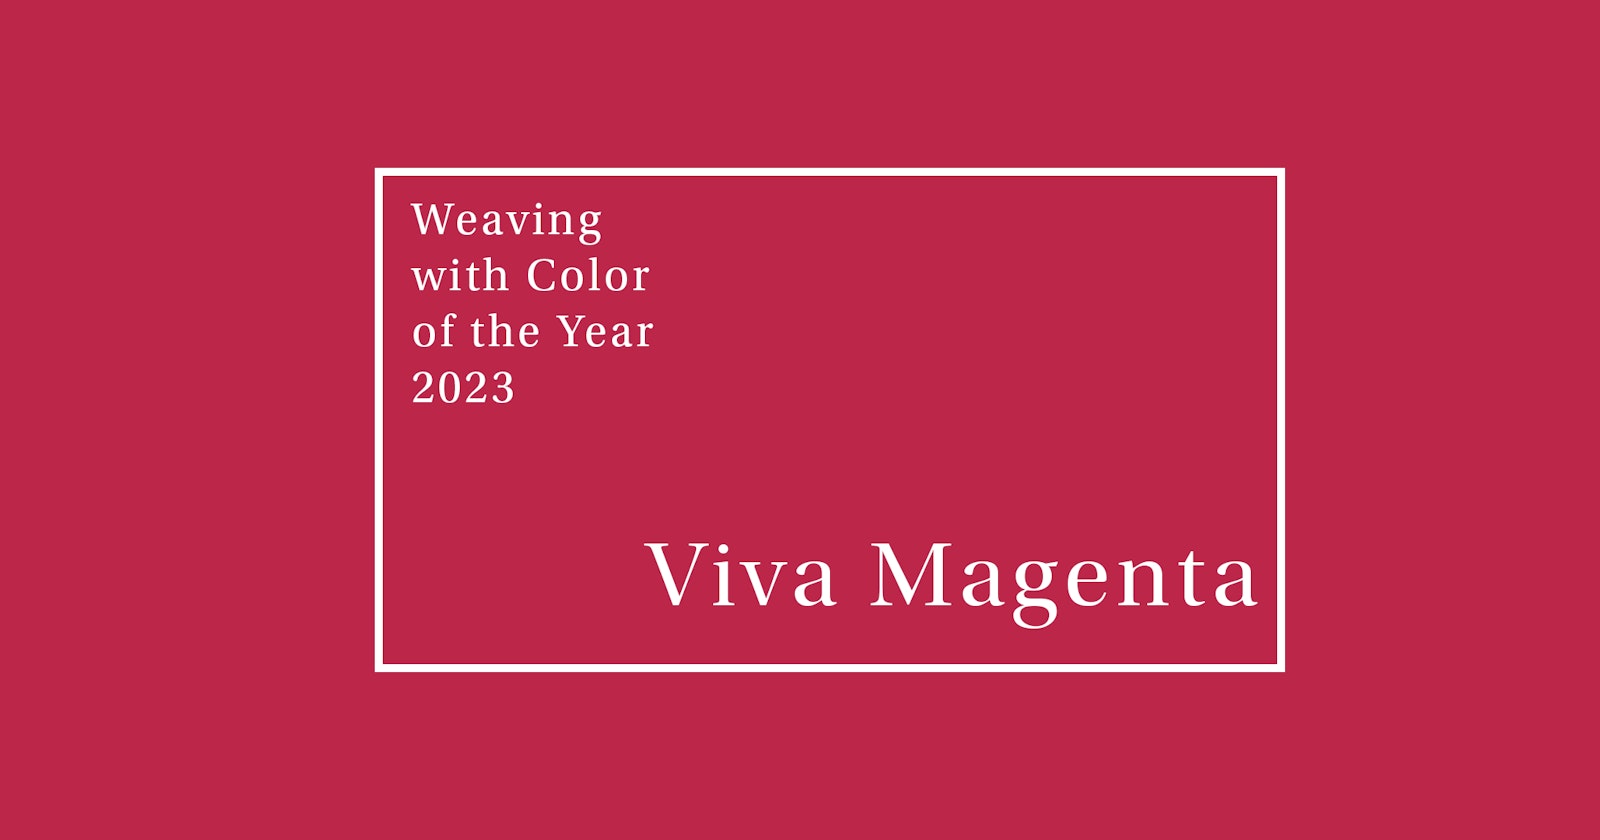 The 2023 Color of the Year and Weaving with Viva Magenta